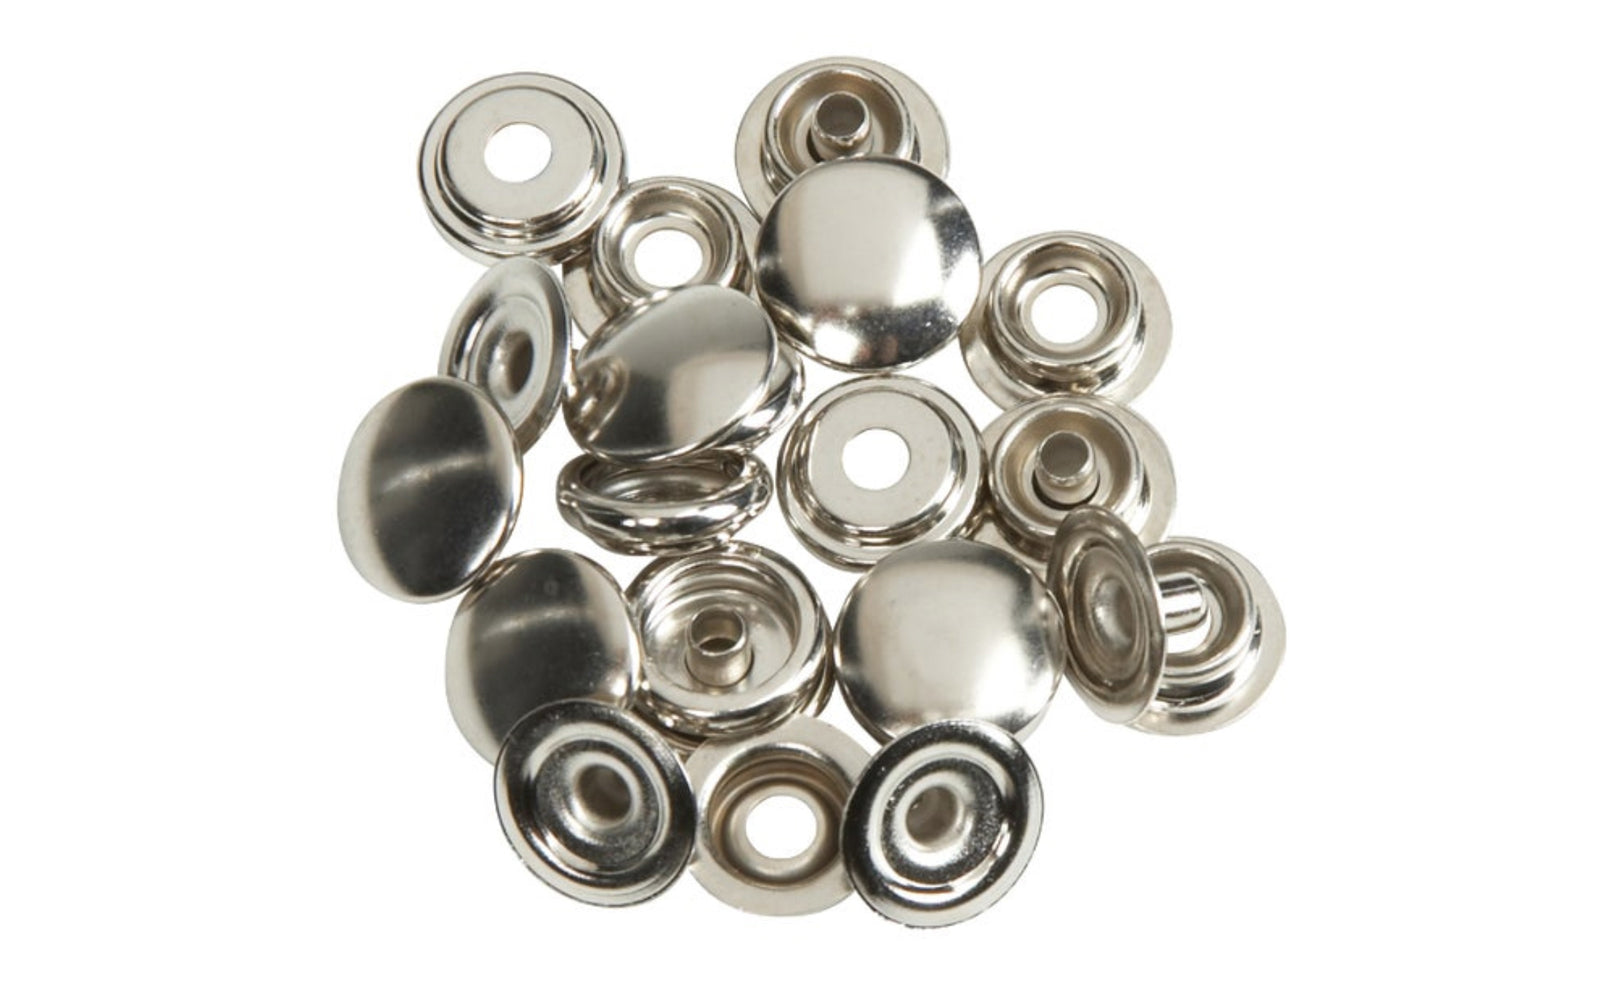 Lord & Hodge Fabric to Fabric Snap Fastener Refills. Six snap sets in pack. Replace broken or torn out snap fasteners. Snaps are nickel-plated brass. Good for fabric, canvas, etc. Made by Lord and Hodge, Inc. Model 1100A. 085301110092. Made in USA. 